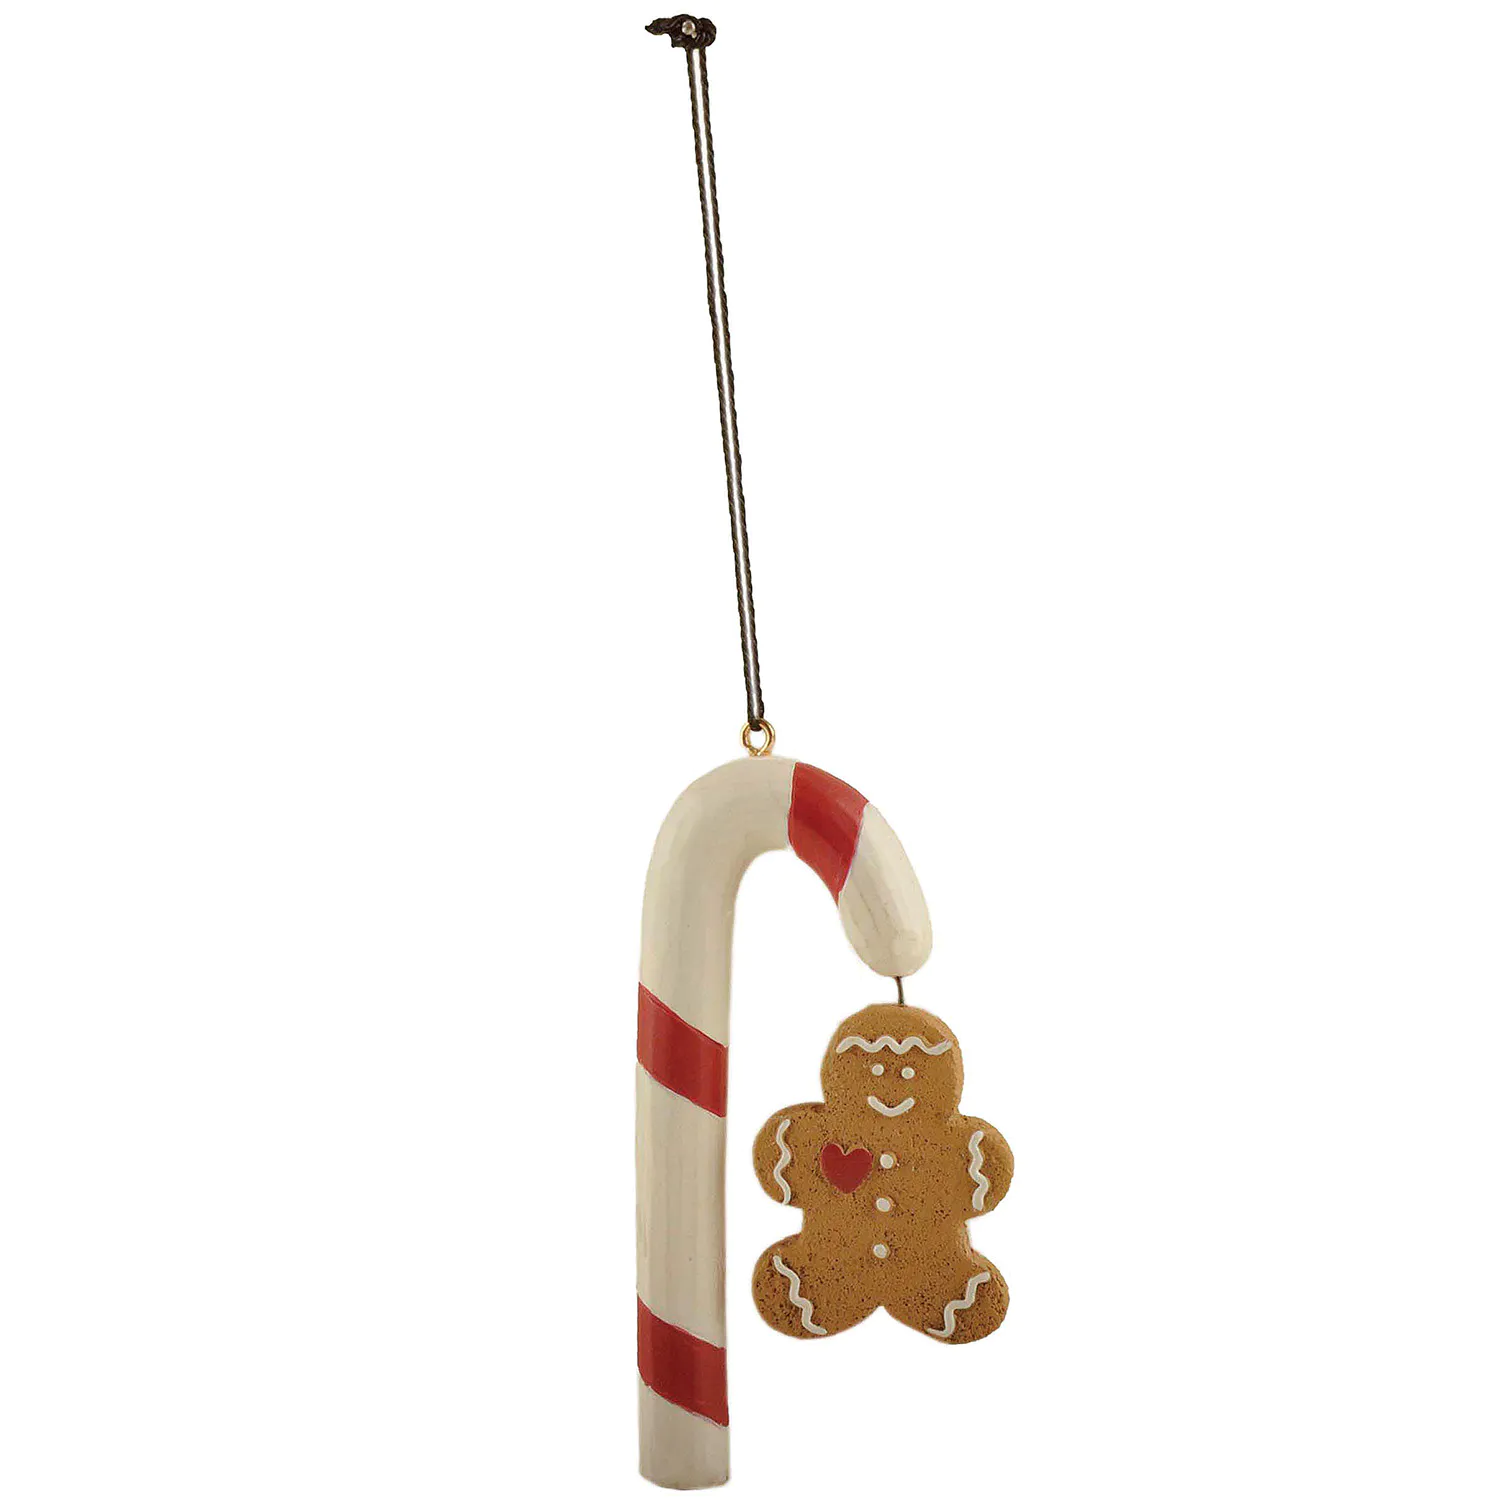 Factor Handmade Resin Gingerbread Crafts Candy Cane w Gingerbread Christmas Ornament for Home Decor 238-52090